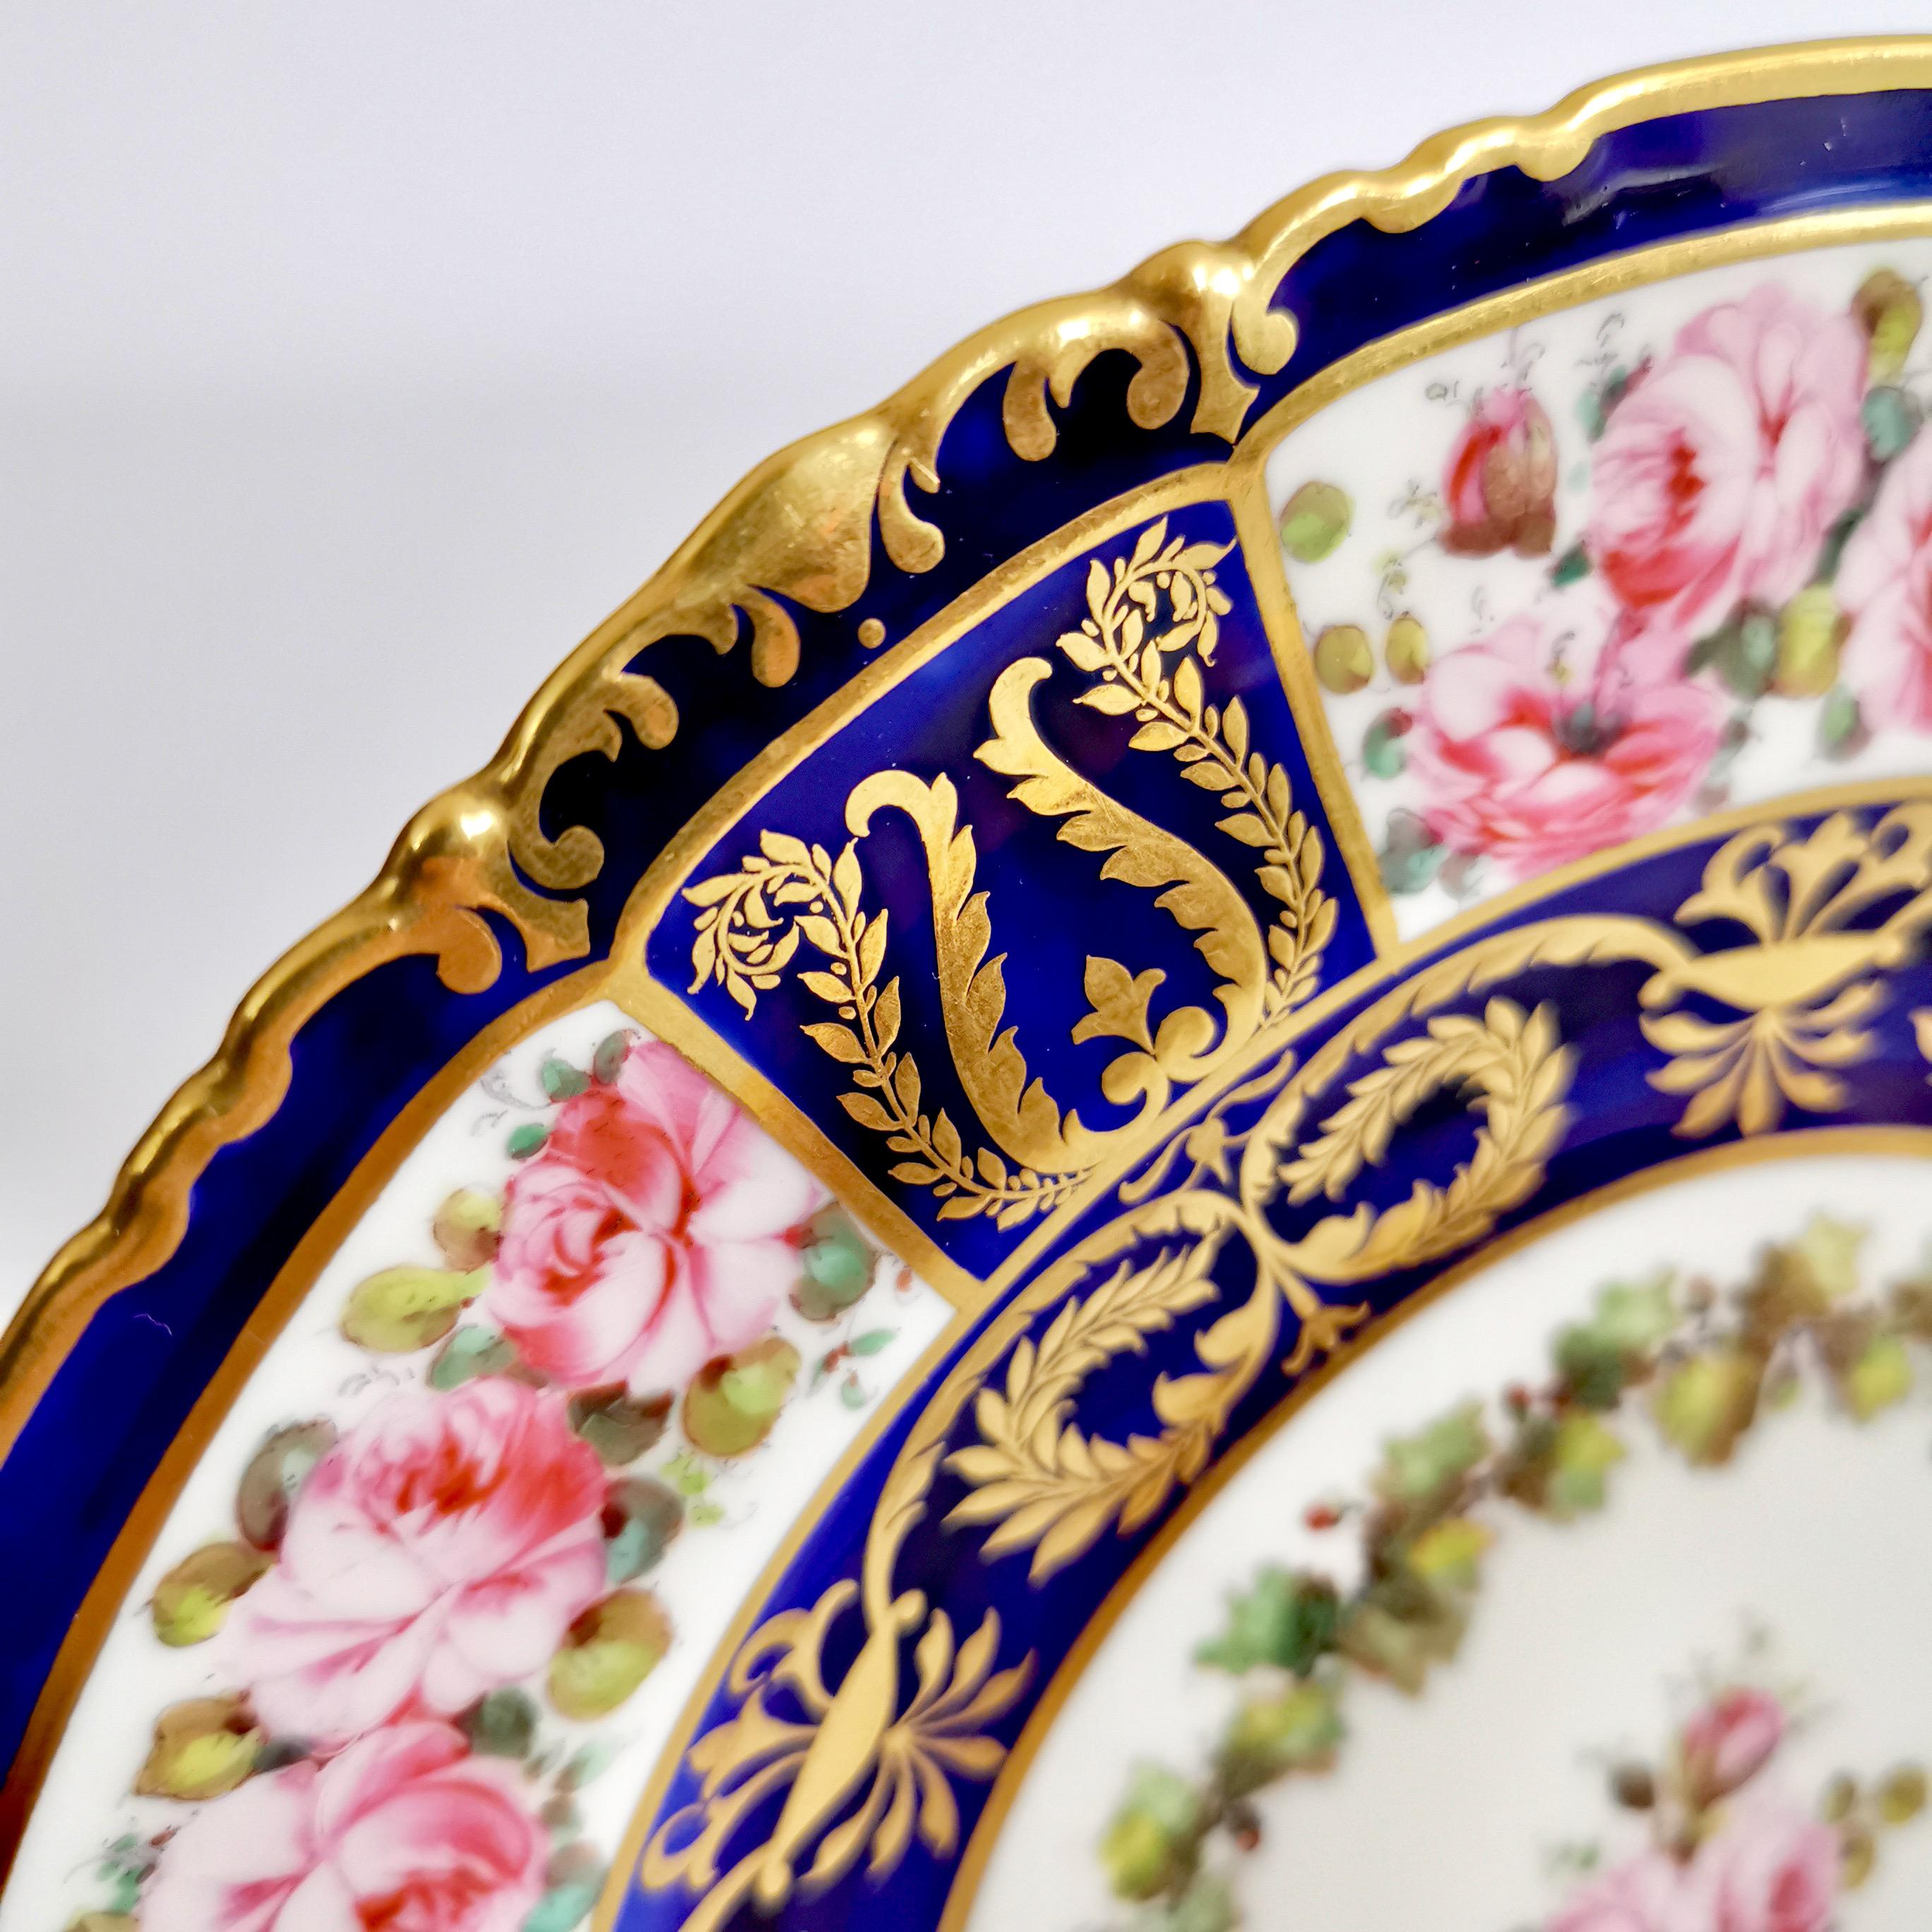 Royal Crown Derby Porcelain Plate, Pink Roses by A. Gregory, Victorian, 1899 1